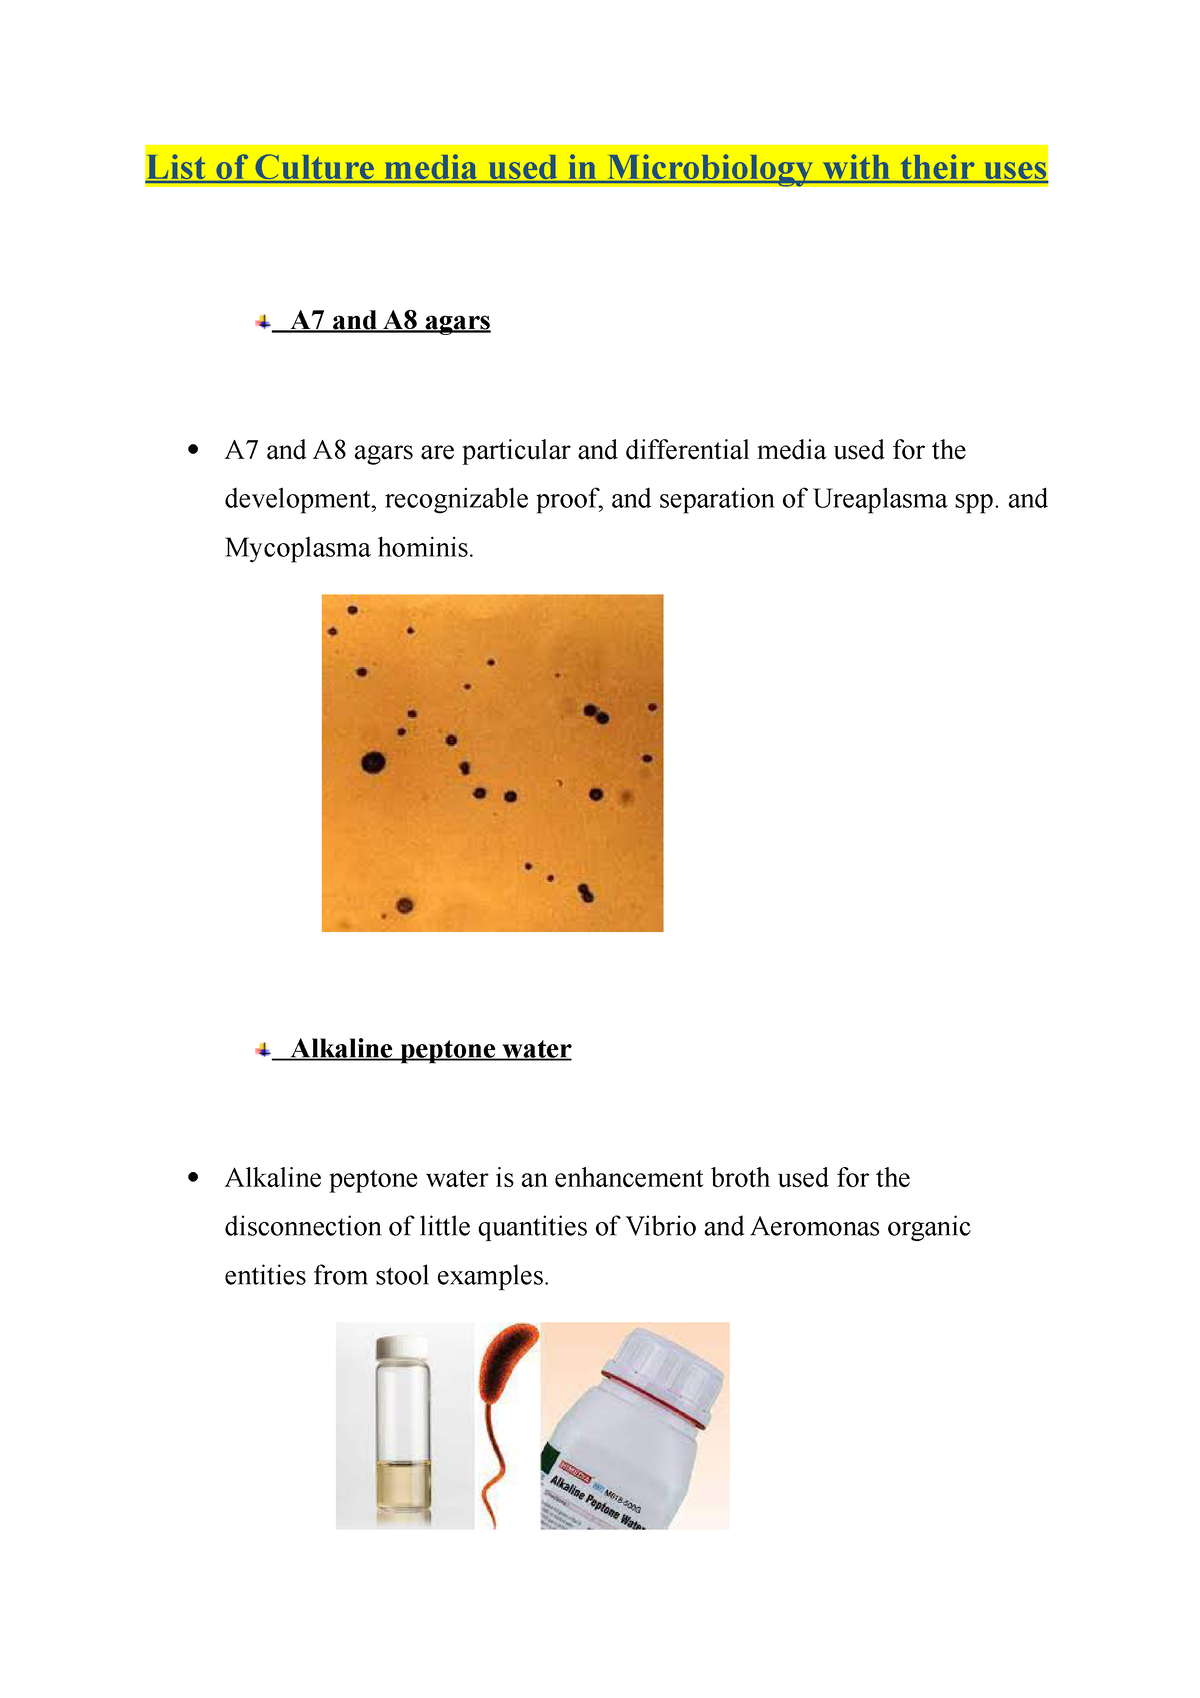 Culture media used in Microbiology